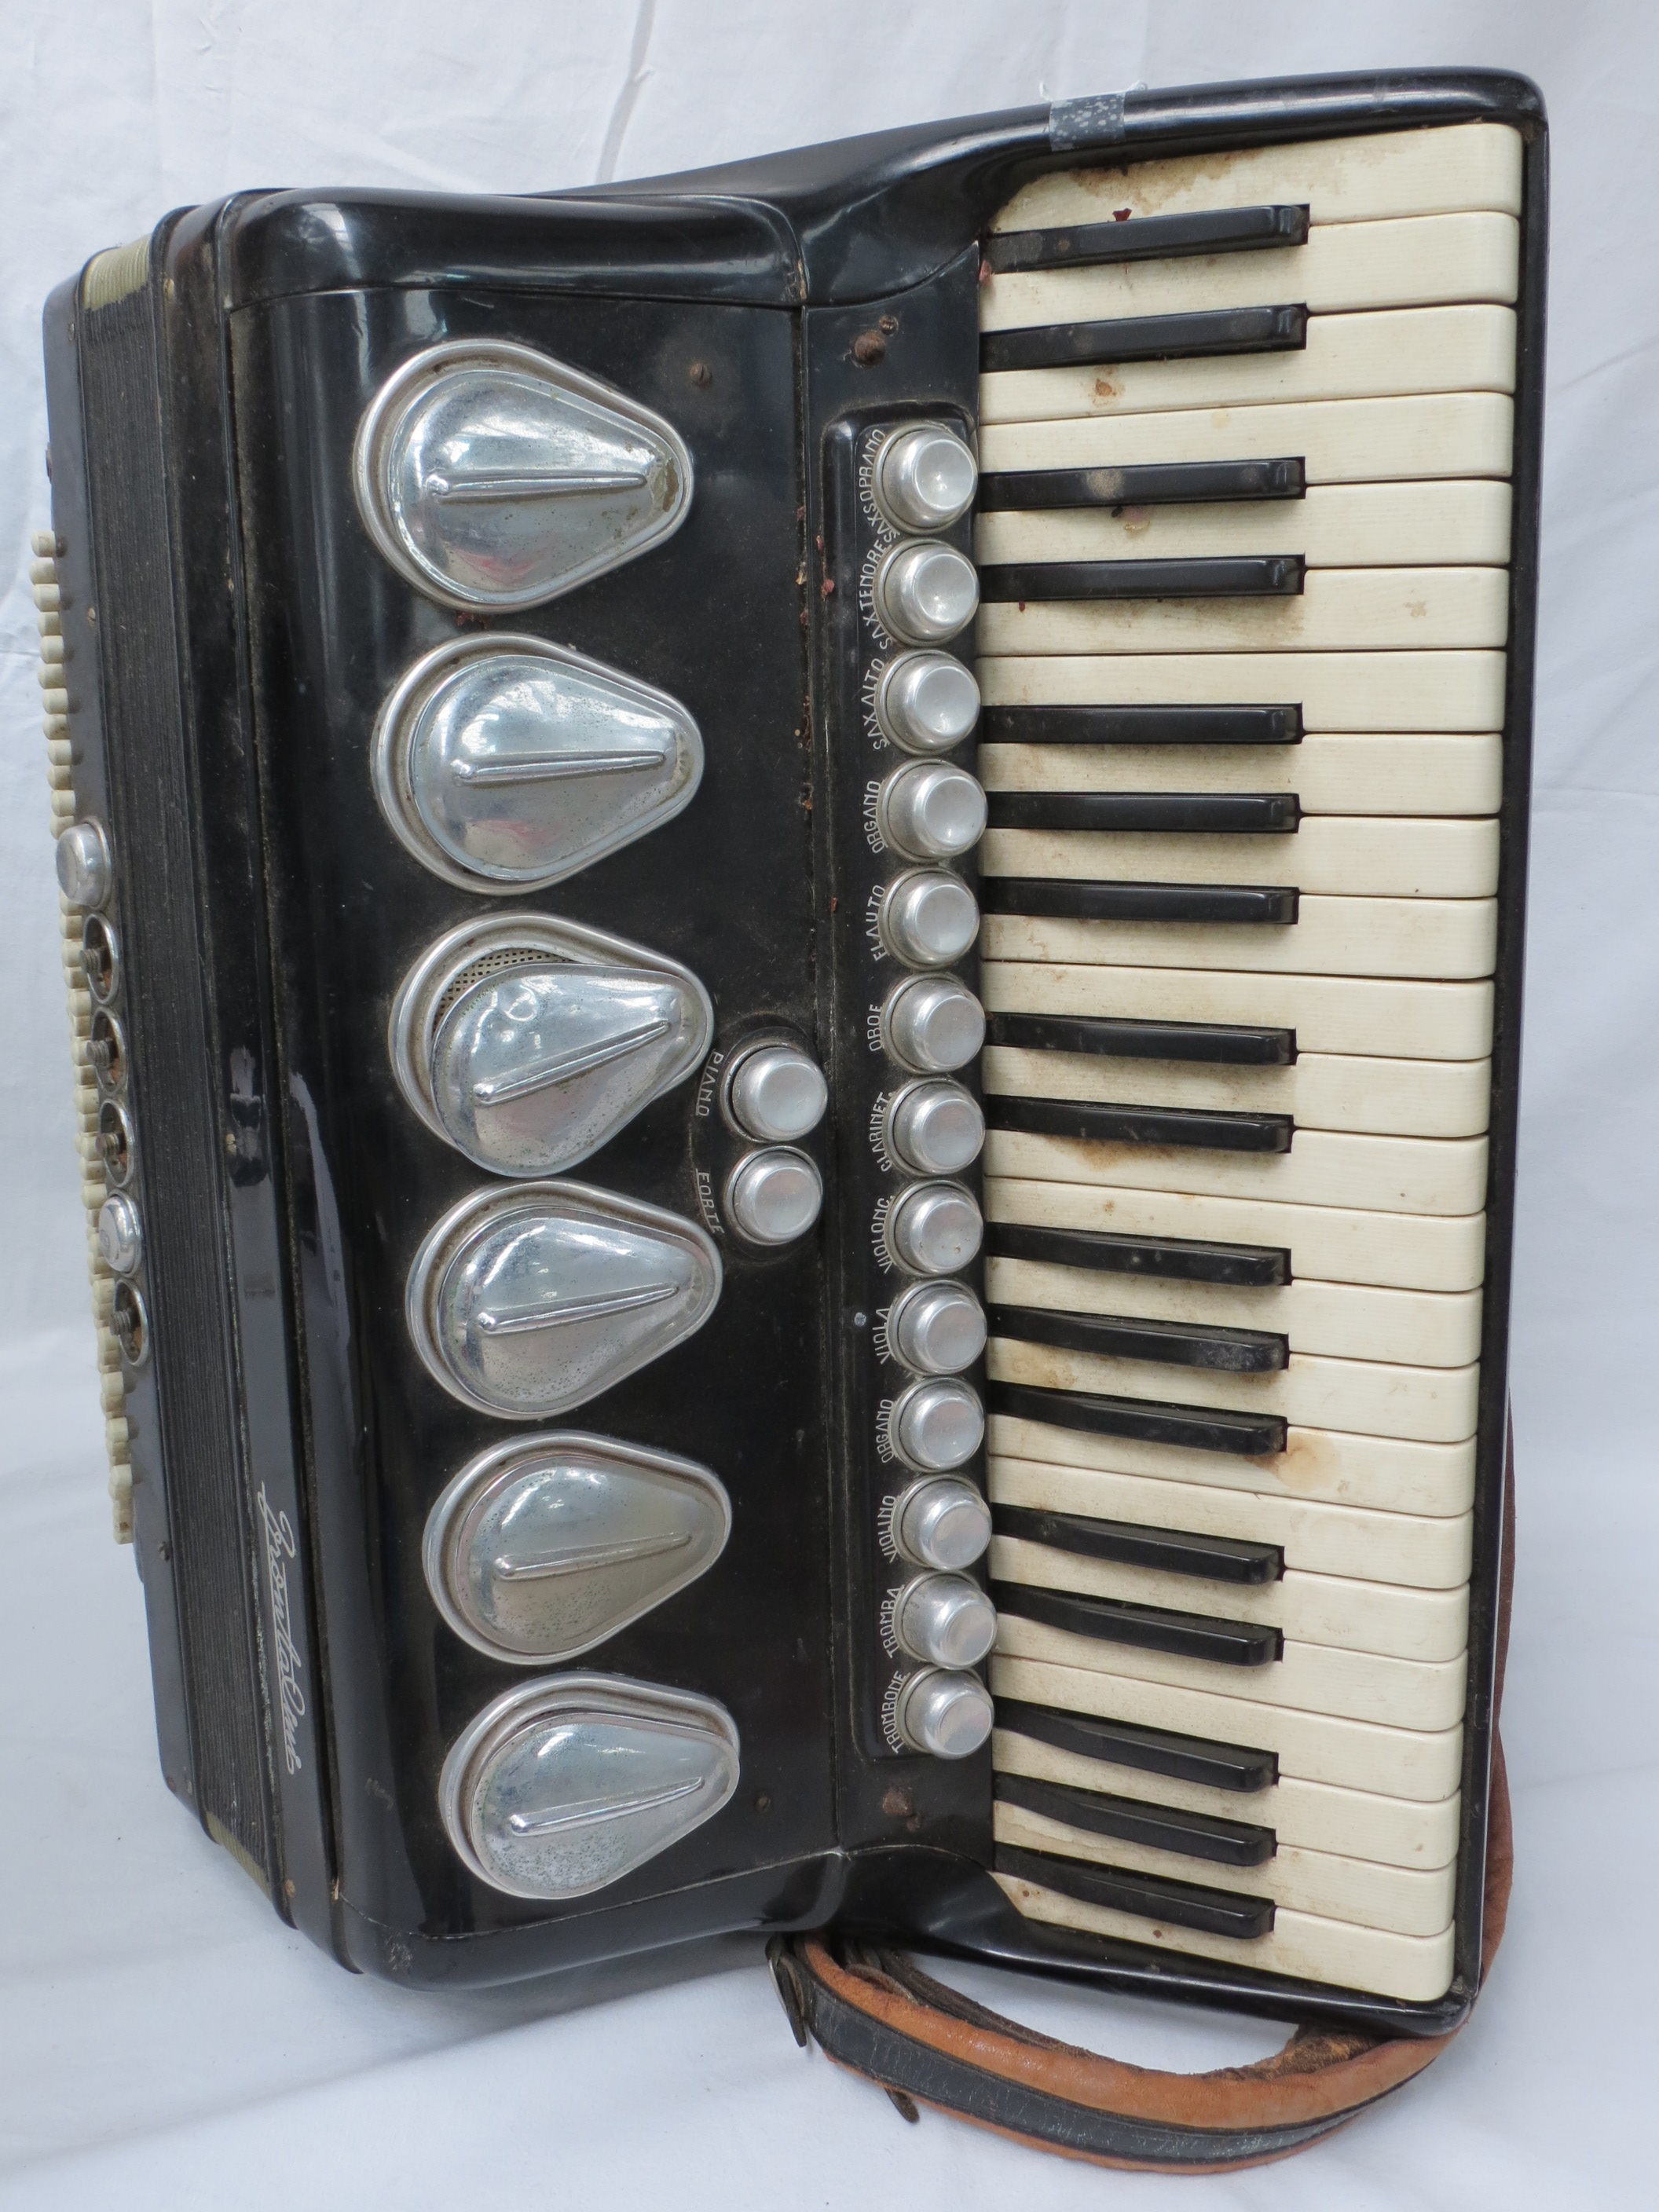 Frontalini Italian piano accordion (number 1290) having 13 stops, for different instruments and